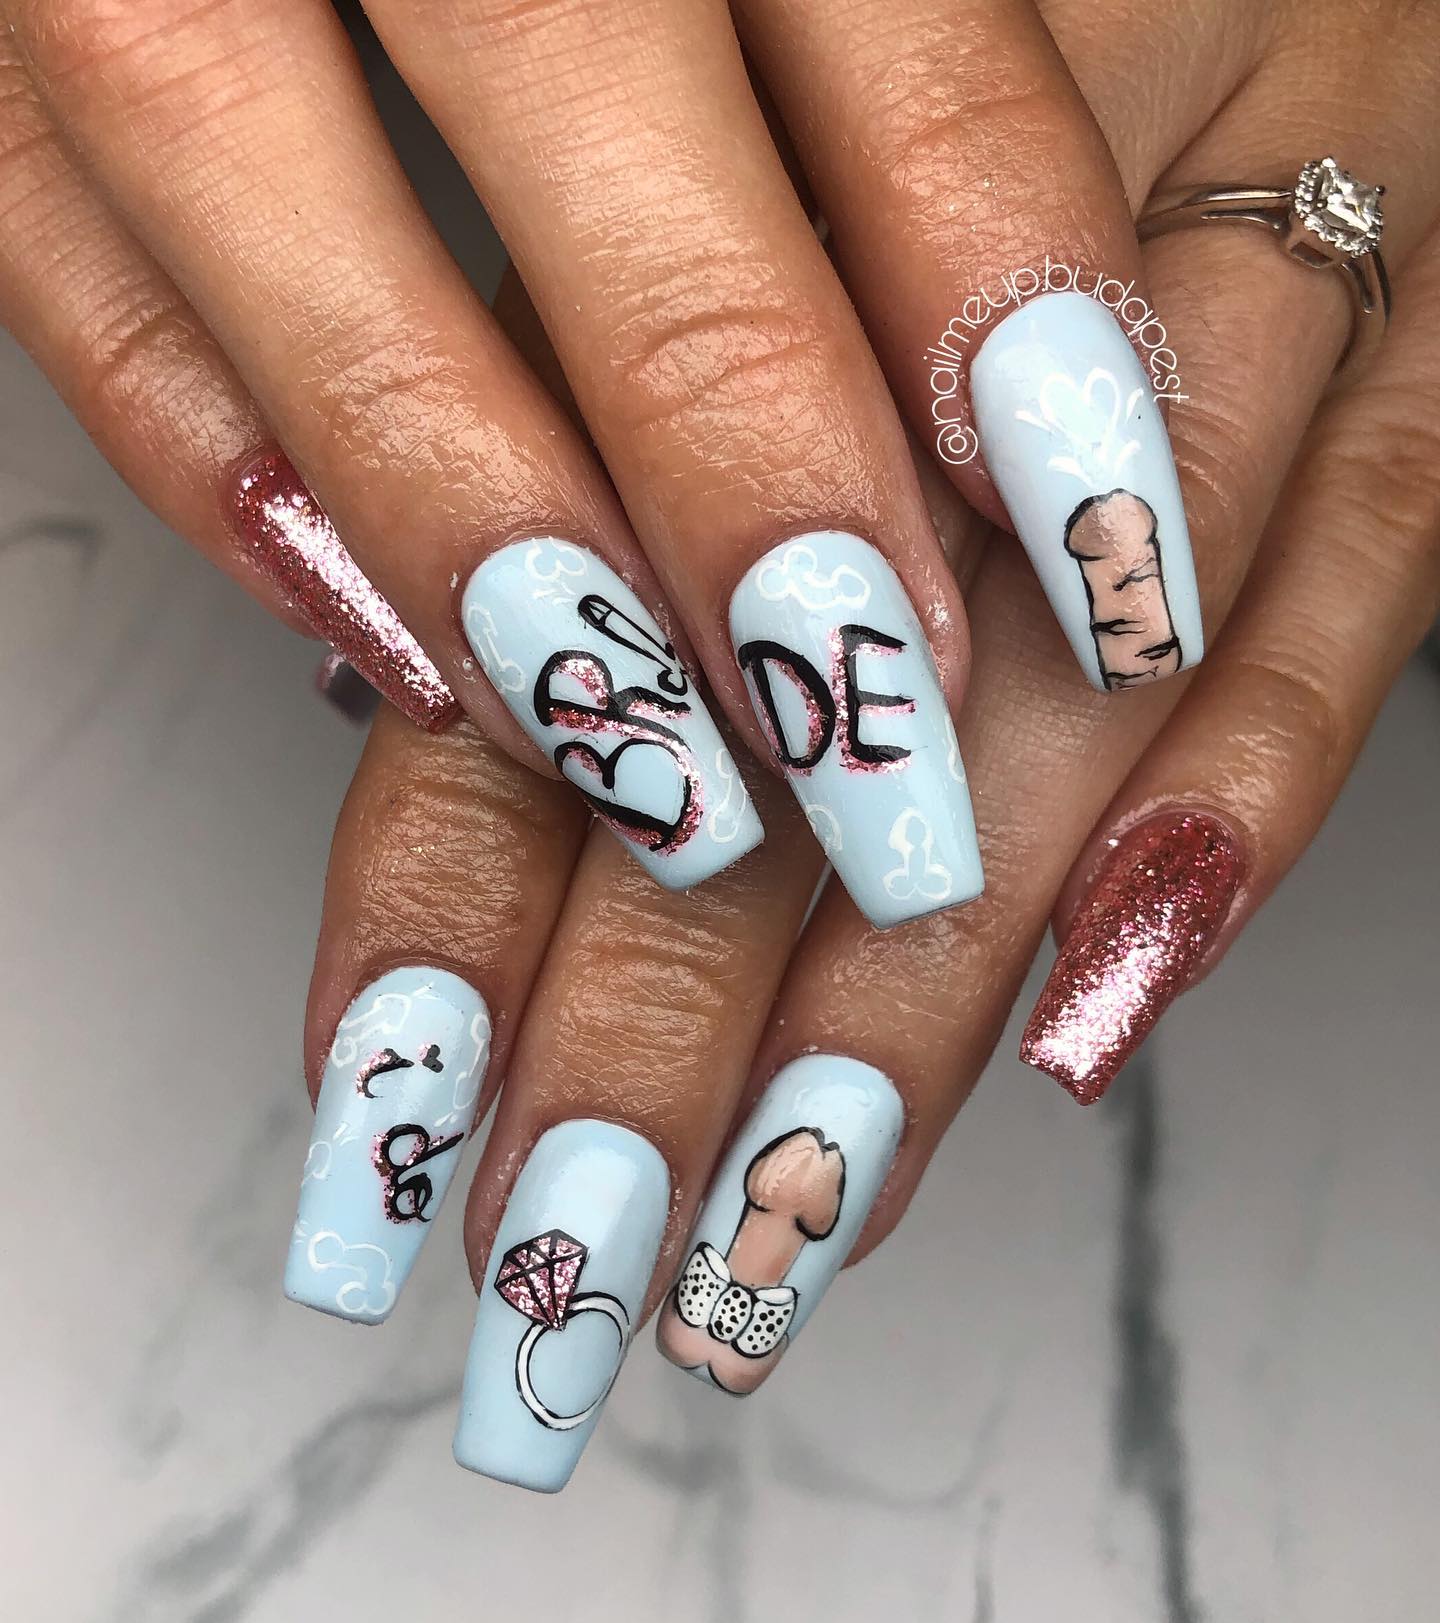 In order to have fun with your nails in your bachelorette party, why don't you apply a penis nail art that is full of wedding rings and some other things?